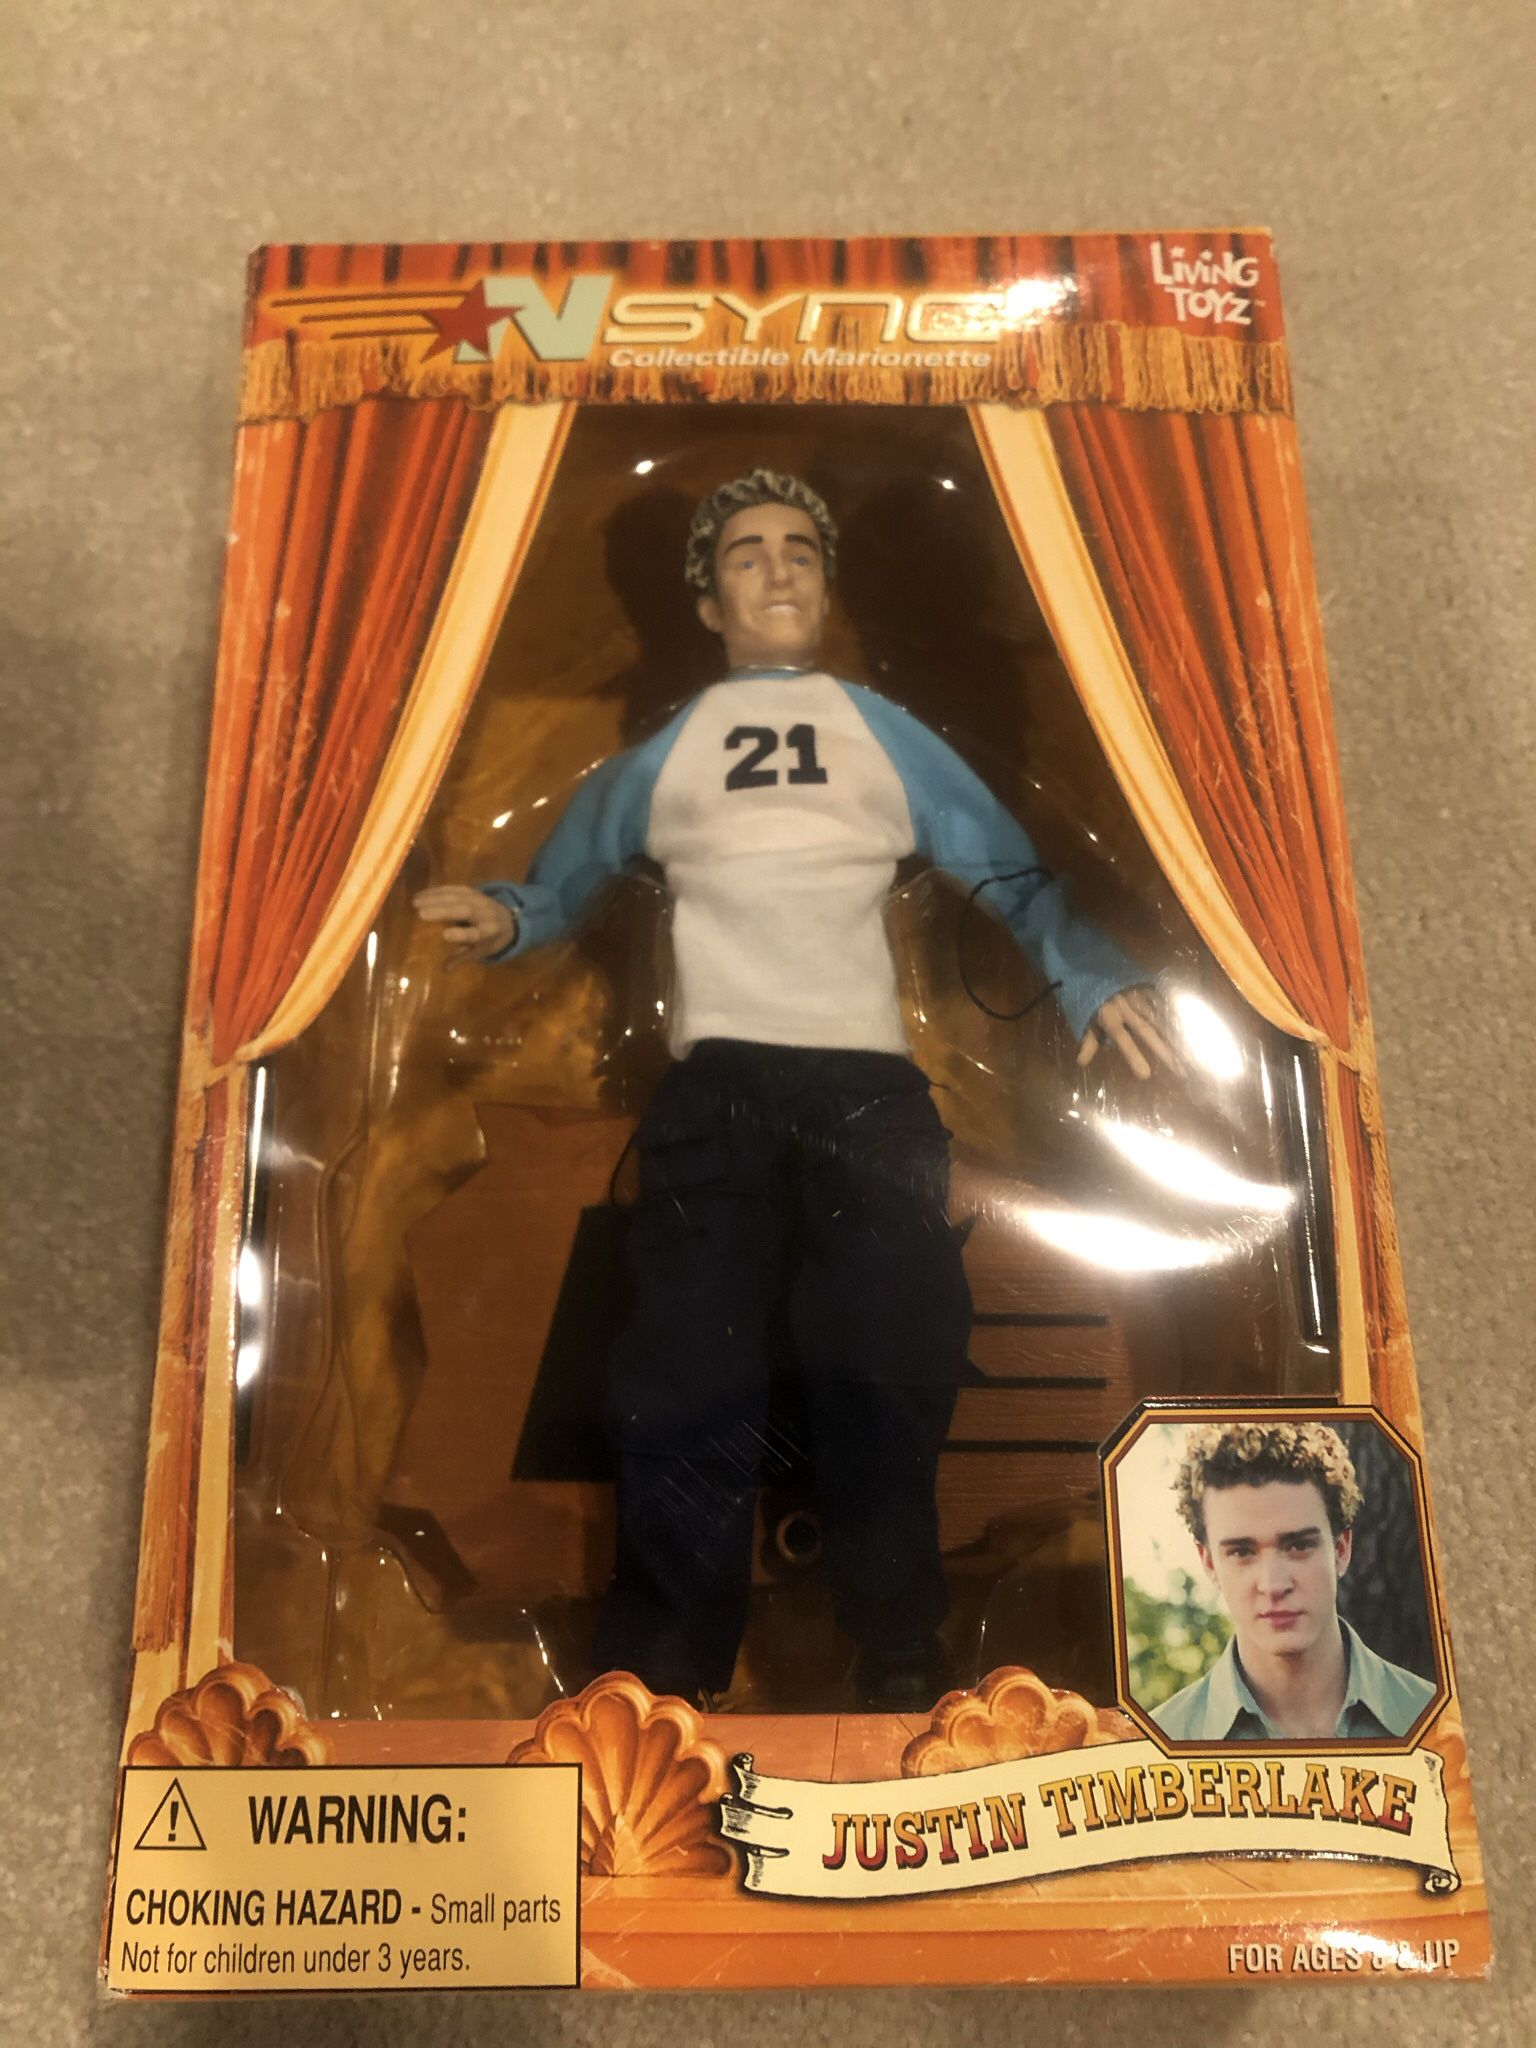 2000 NSYNC Marionette Justin Timberlake Action Figure Doll By Living Toys New 